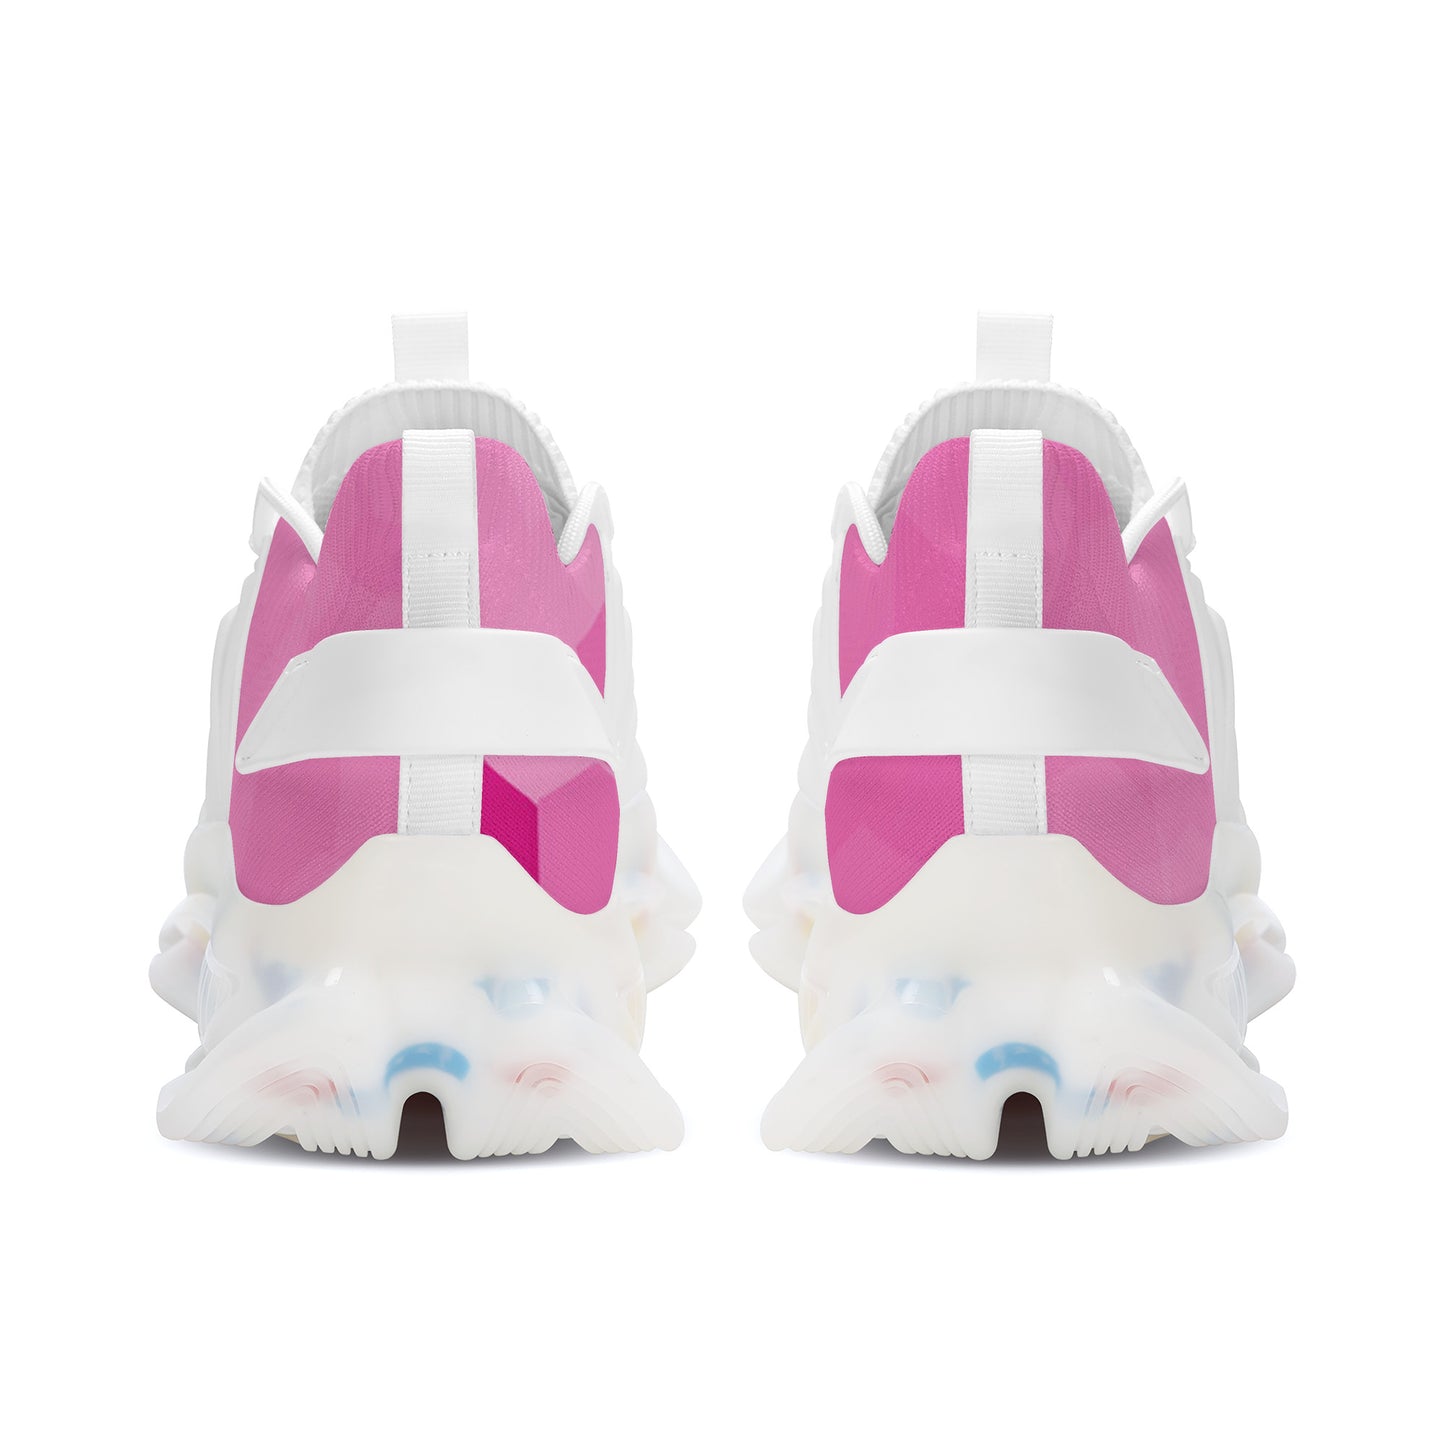 Air Max React Sneakers - White/Pink